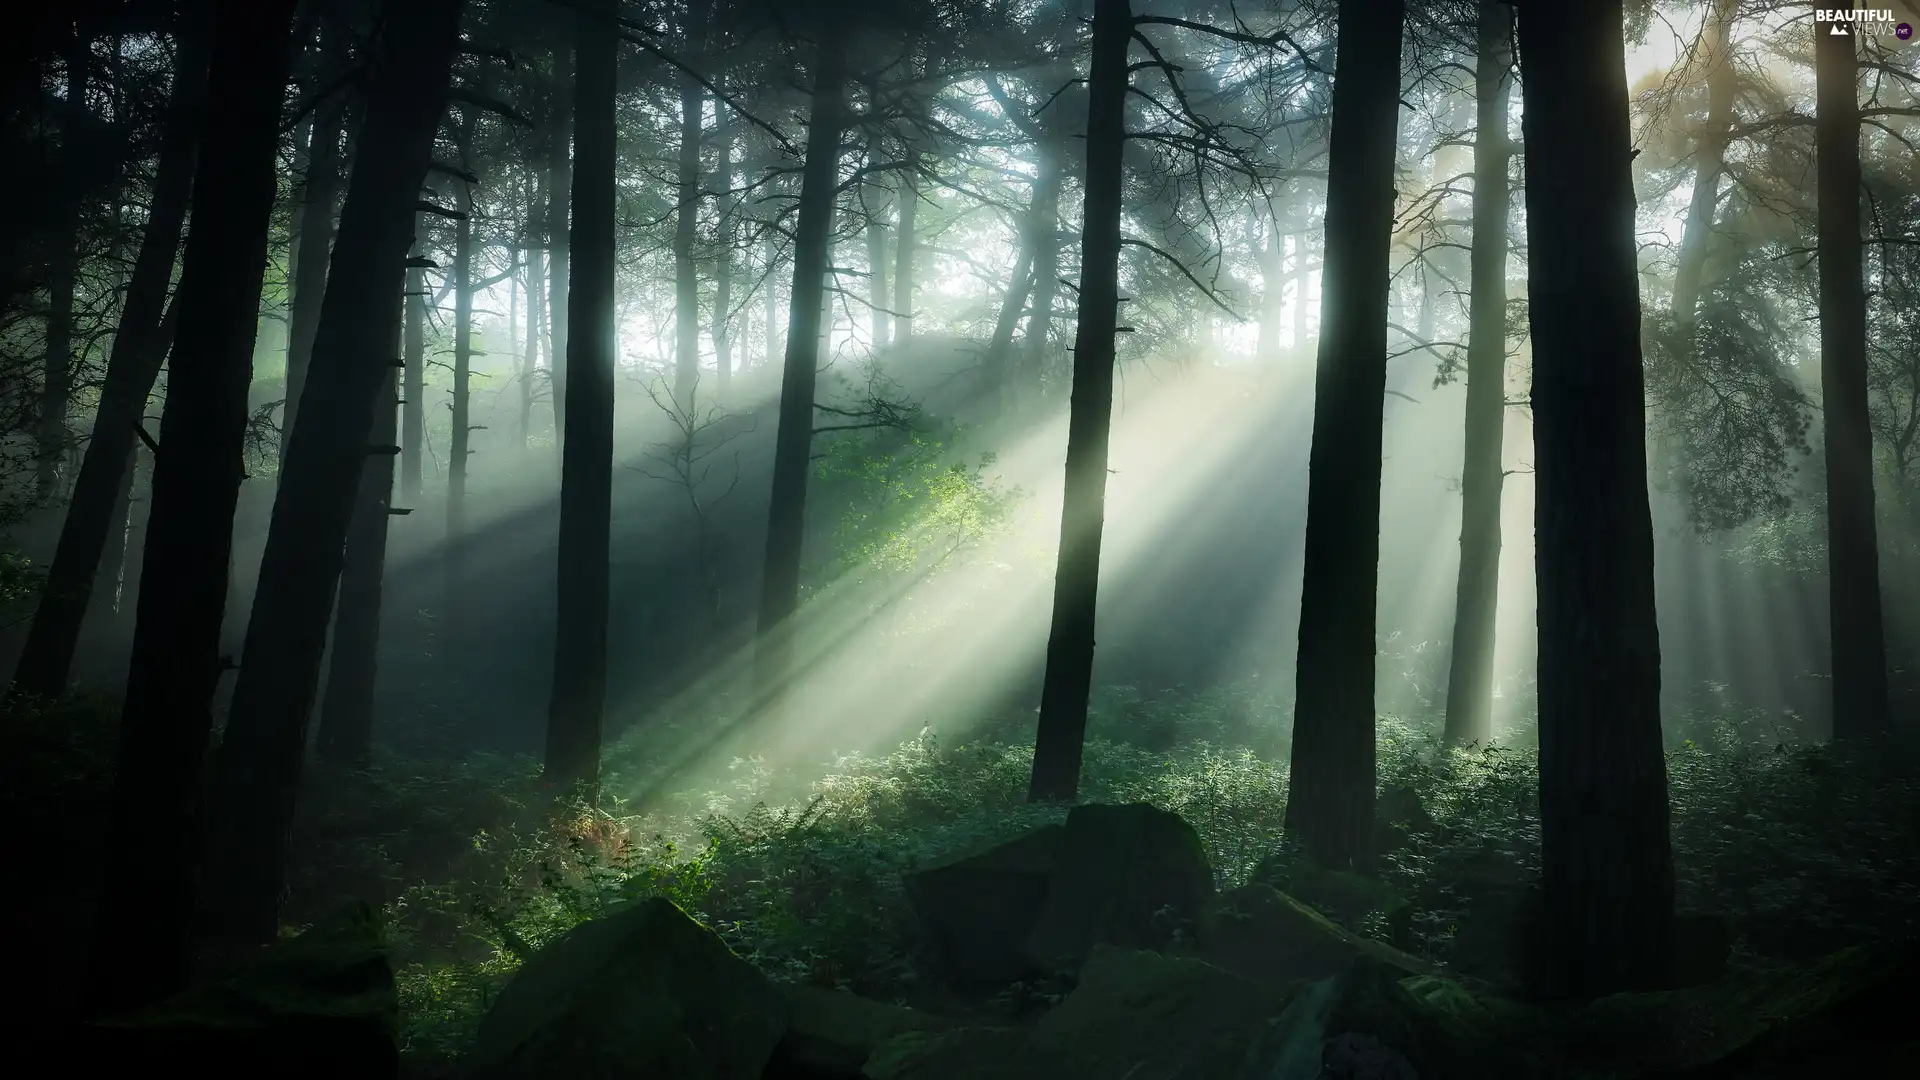 Fog, light breaking through sky, trees, viewes, forest